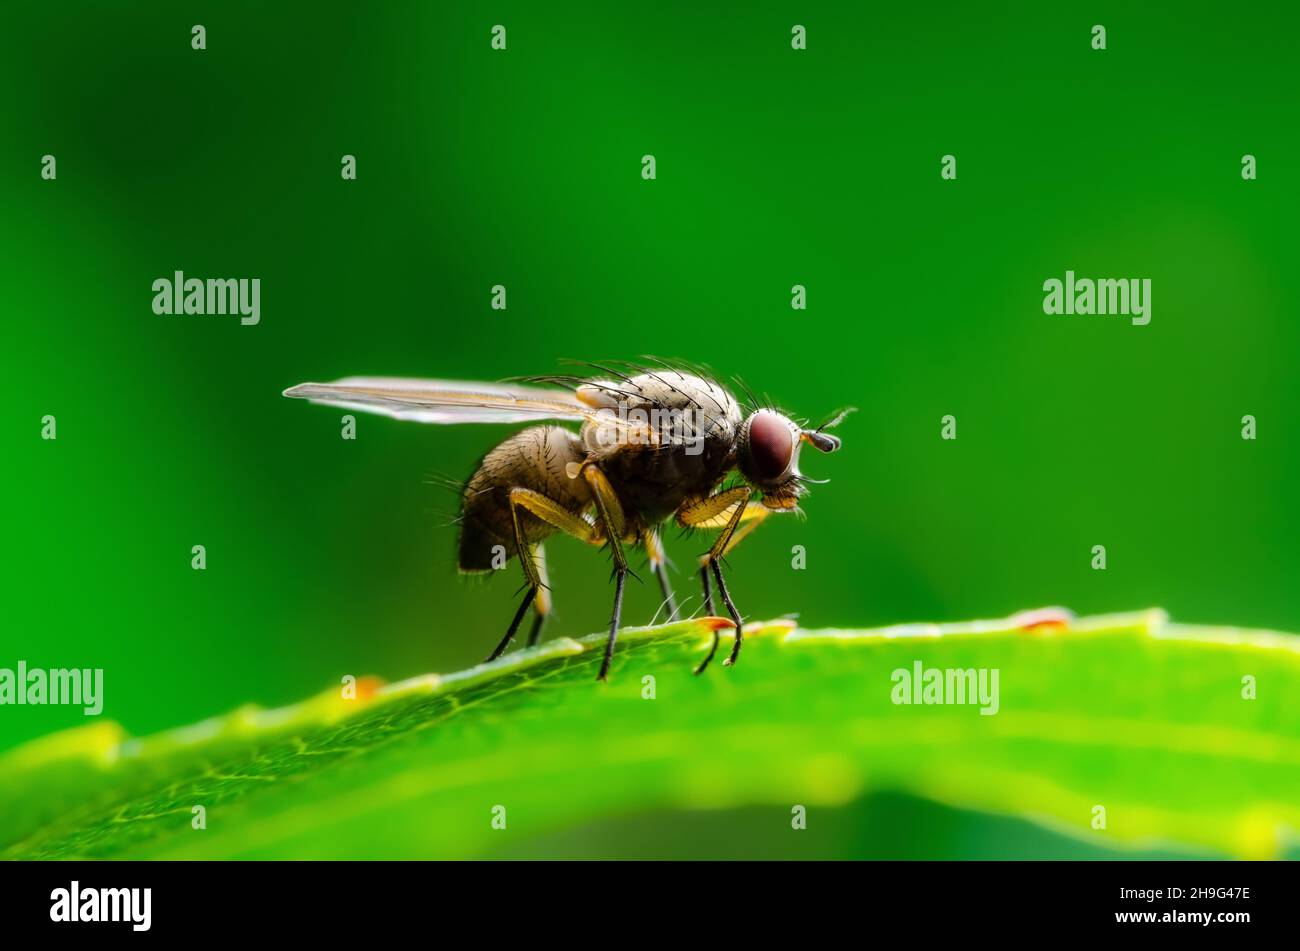 Exotic Drosophila Fly Diptera Parasite Insect on Green Leaf Macro Stock Photo